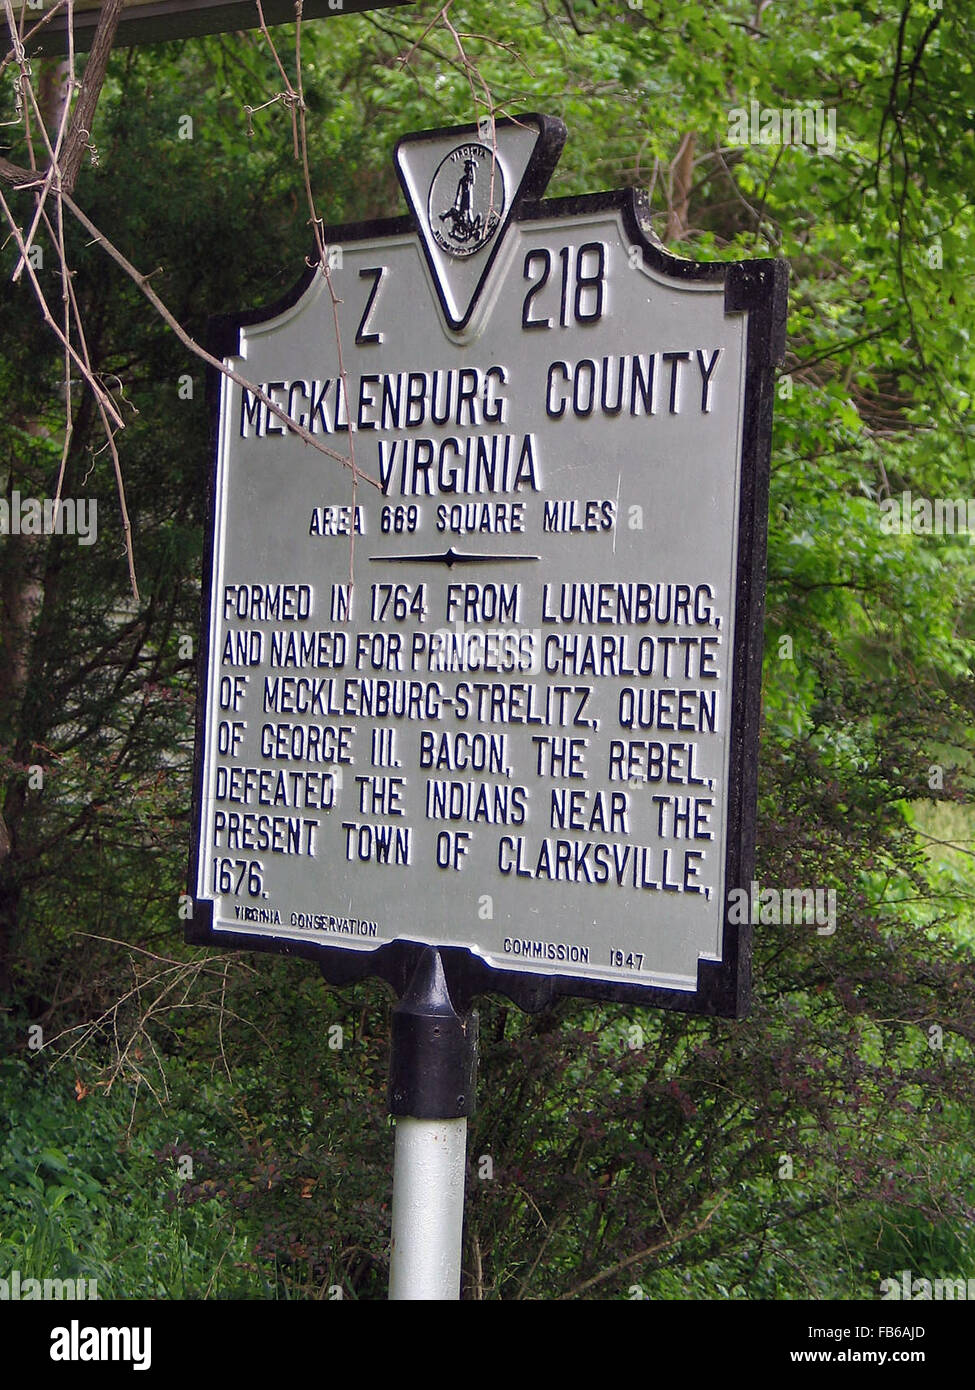 MECKLENBURG COUNTY VIRGINIA  Area 669 Square Miles  Formed in 1764 from Lunenburg, and named for Princess Charlotte of Mecklenburg-Strelitz, Queen of George III. Bacon, the Rebel, defeated the Indians near the present town of Clarksville, 1676.  Virginia Conservation Commission, 1947 Stock Photo